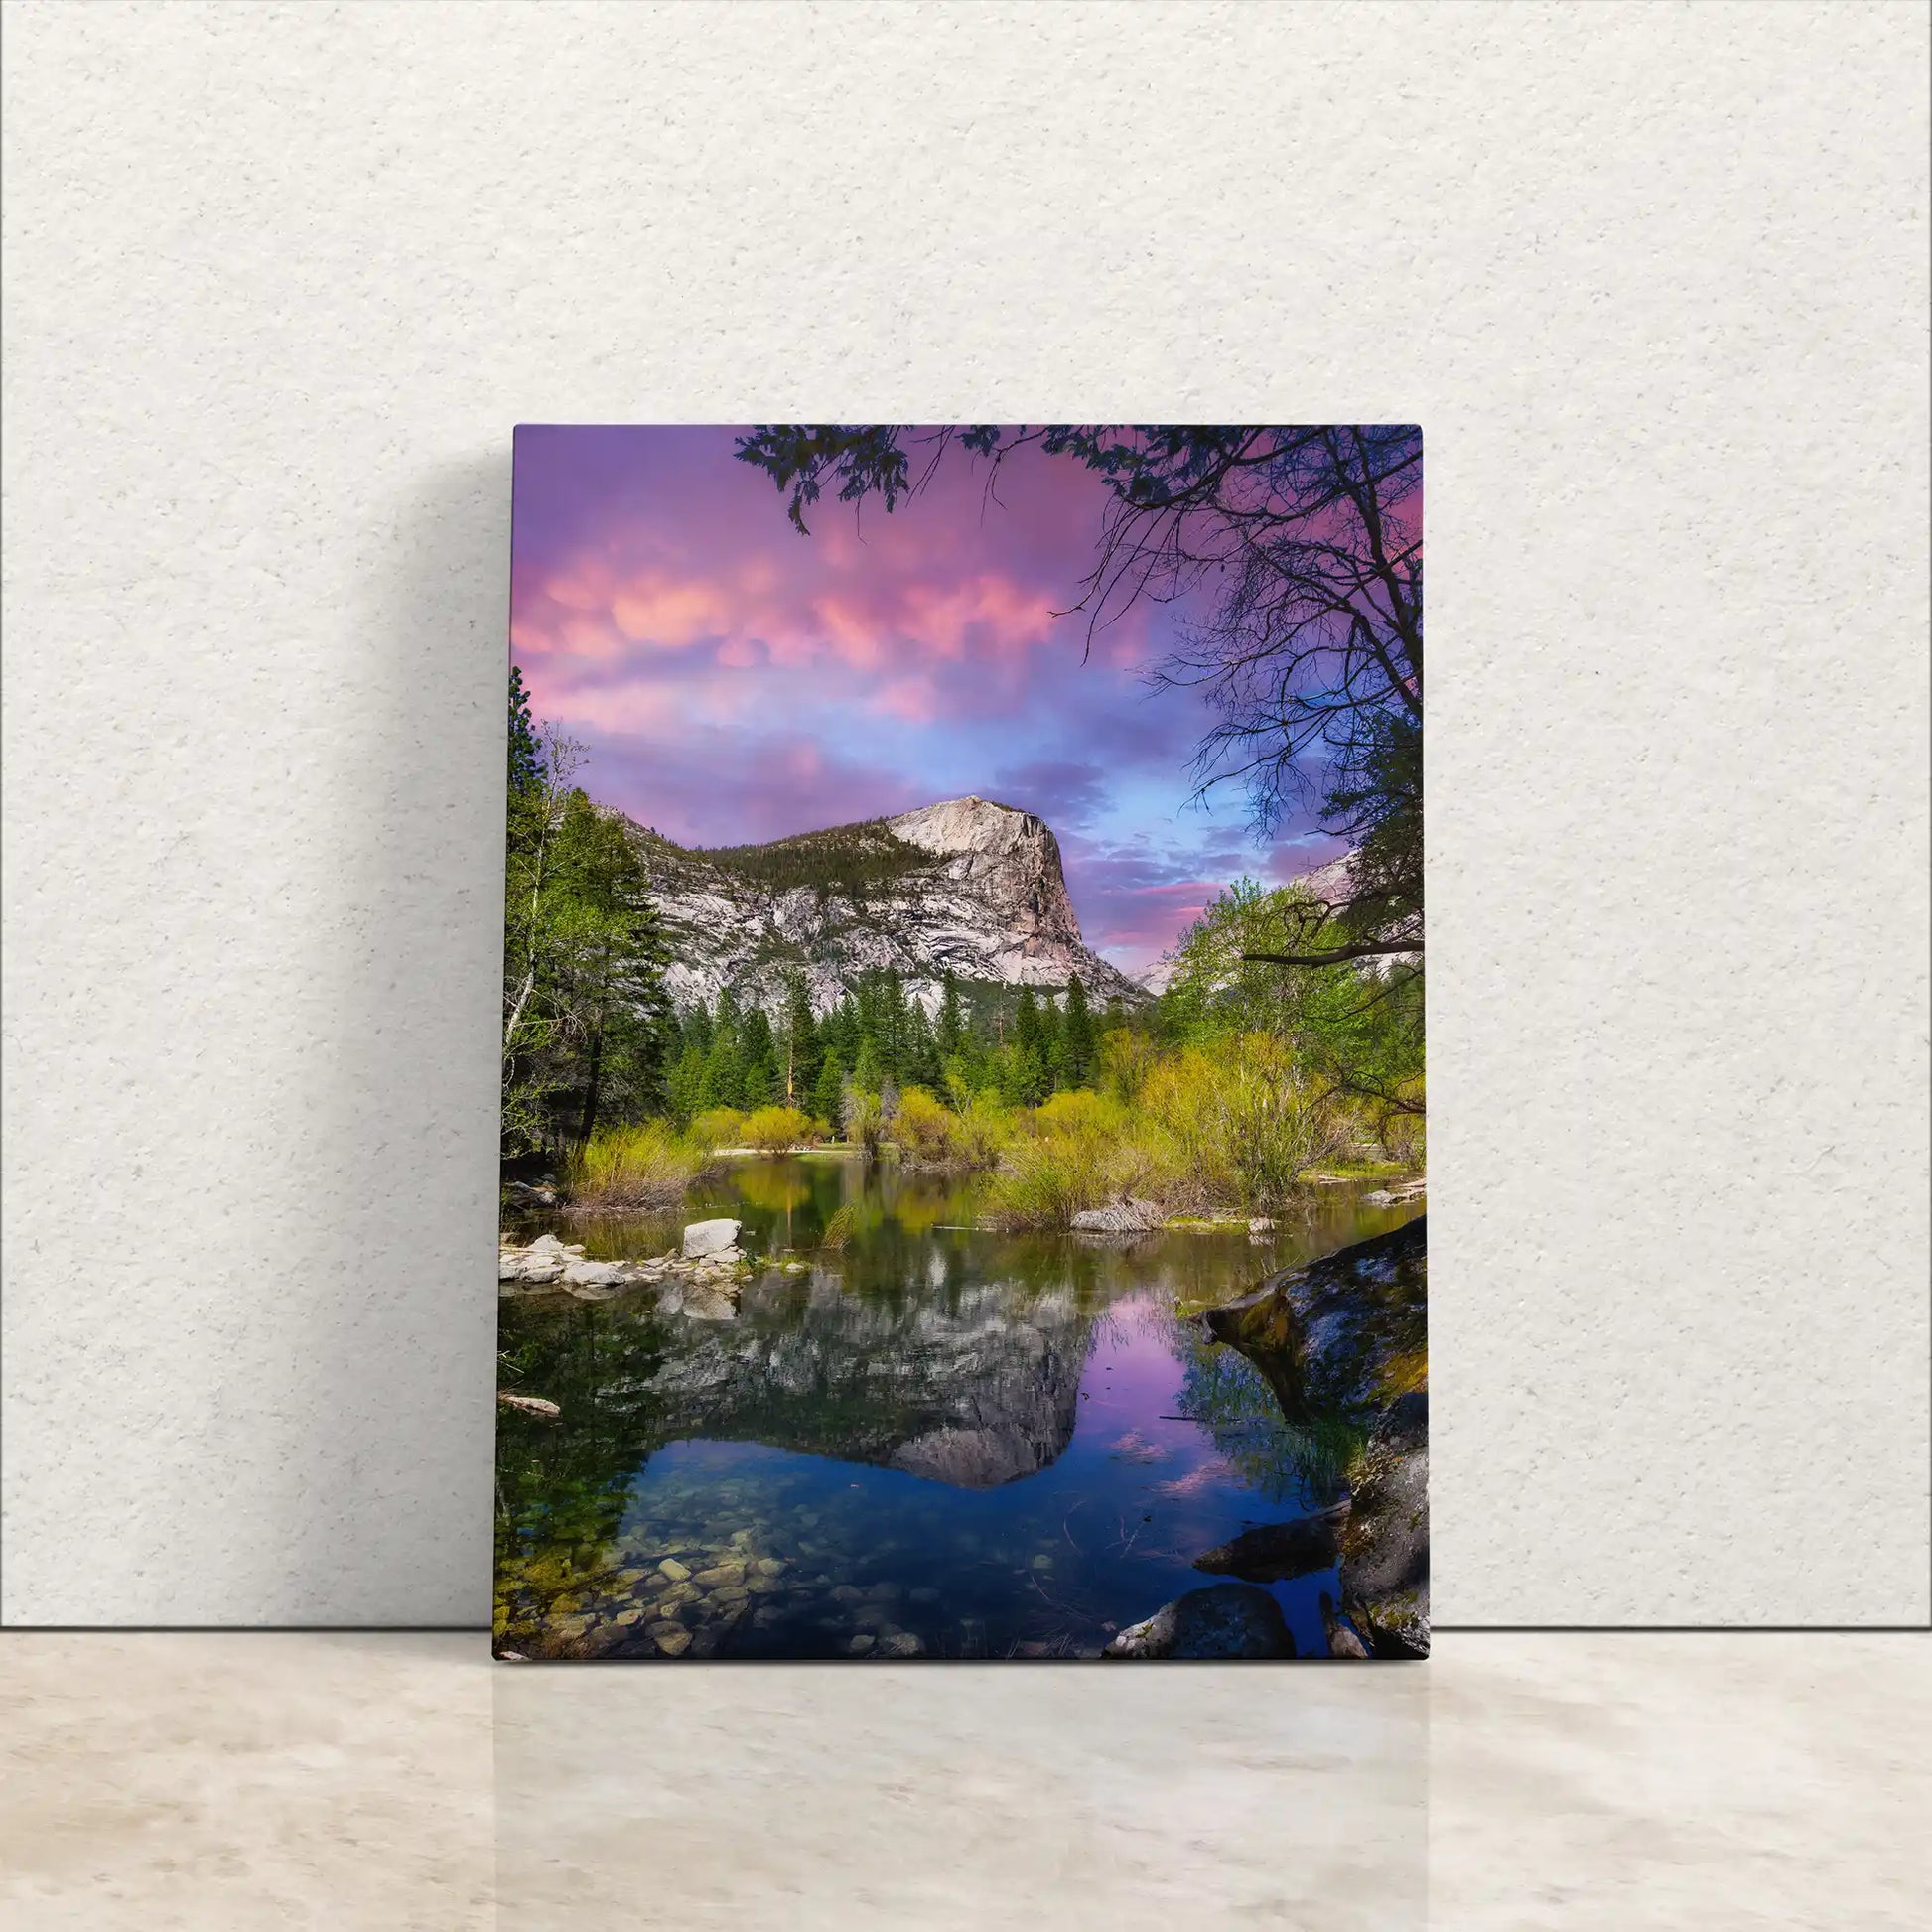 Canvas print of Mt. Watkins and Mirror Lake at Yosemite leaning against a wall, capturing the twilight sky's reflection.